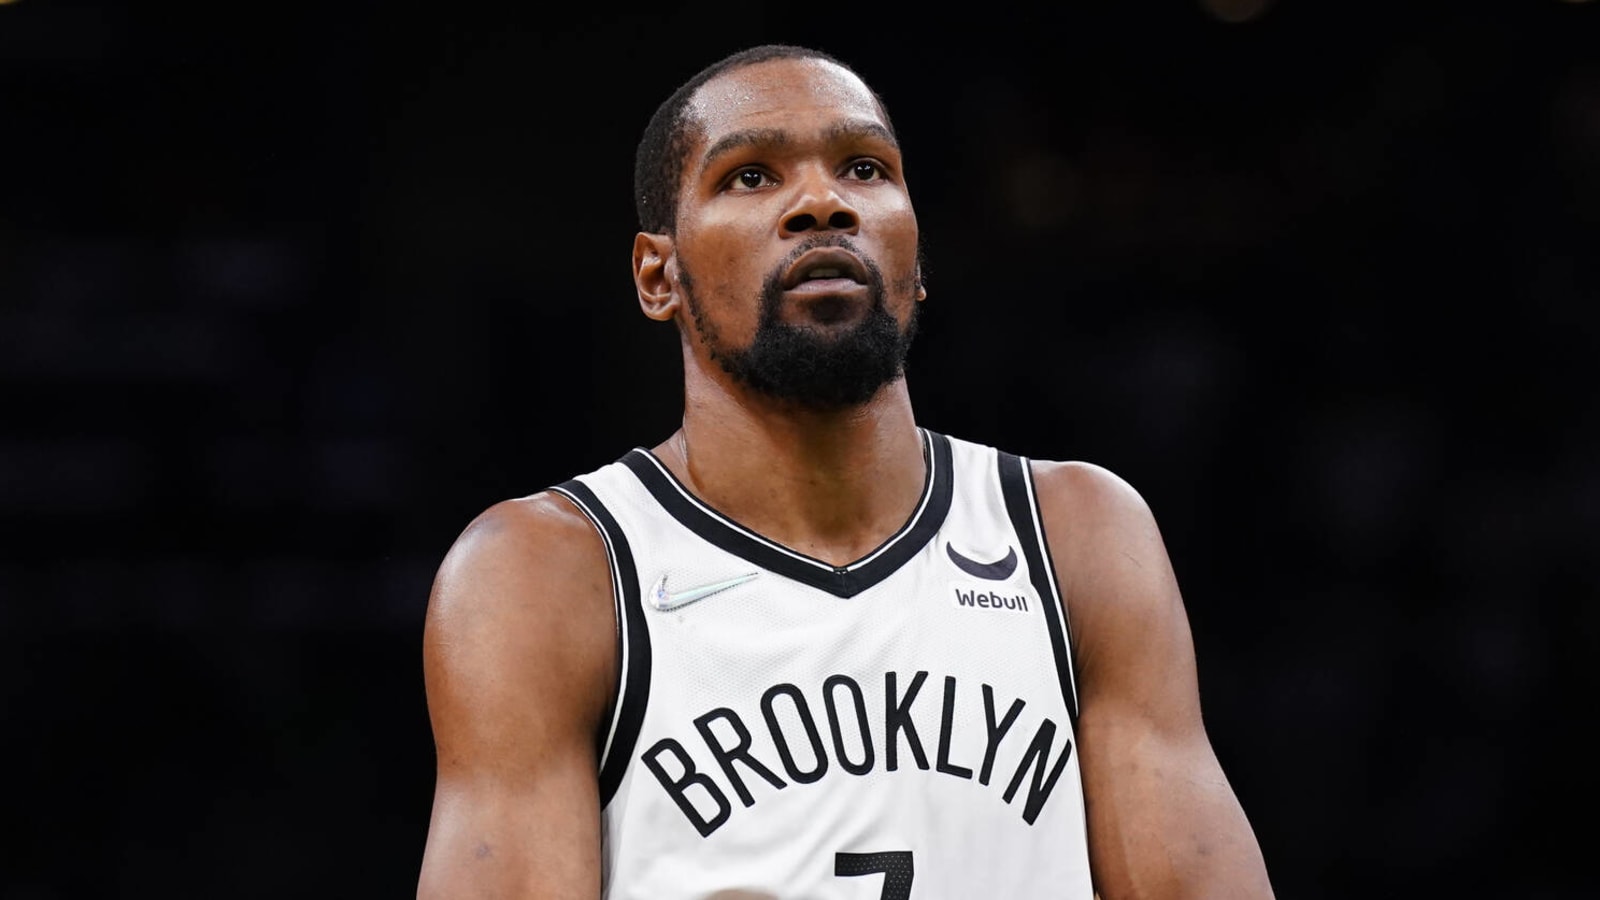 KD's recent struggles magnify longstanding issues for Nets